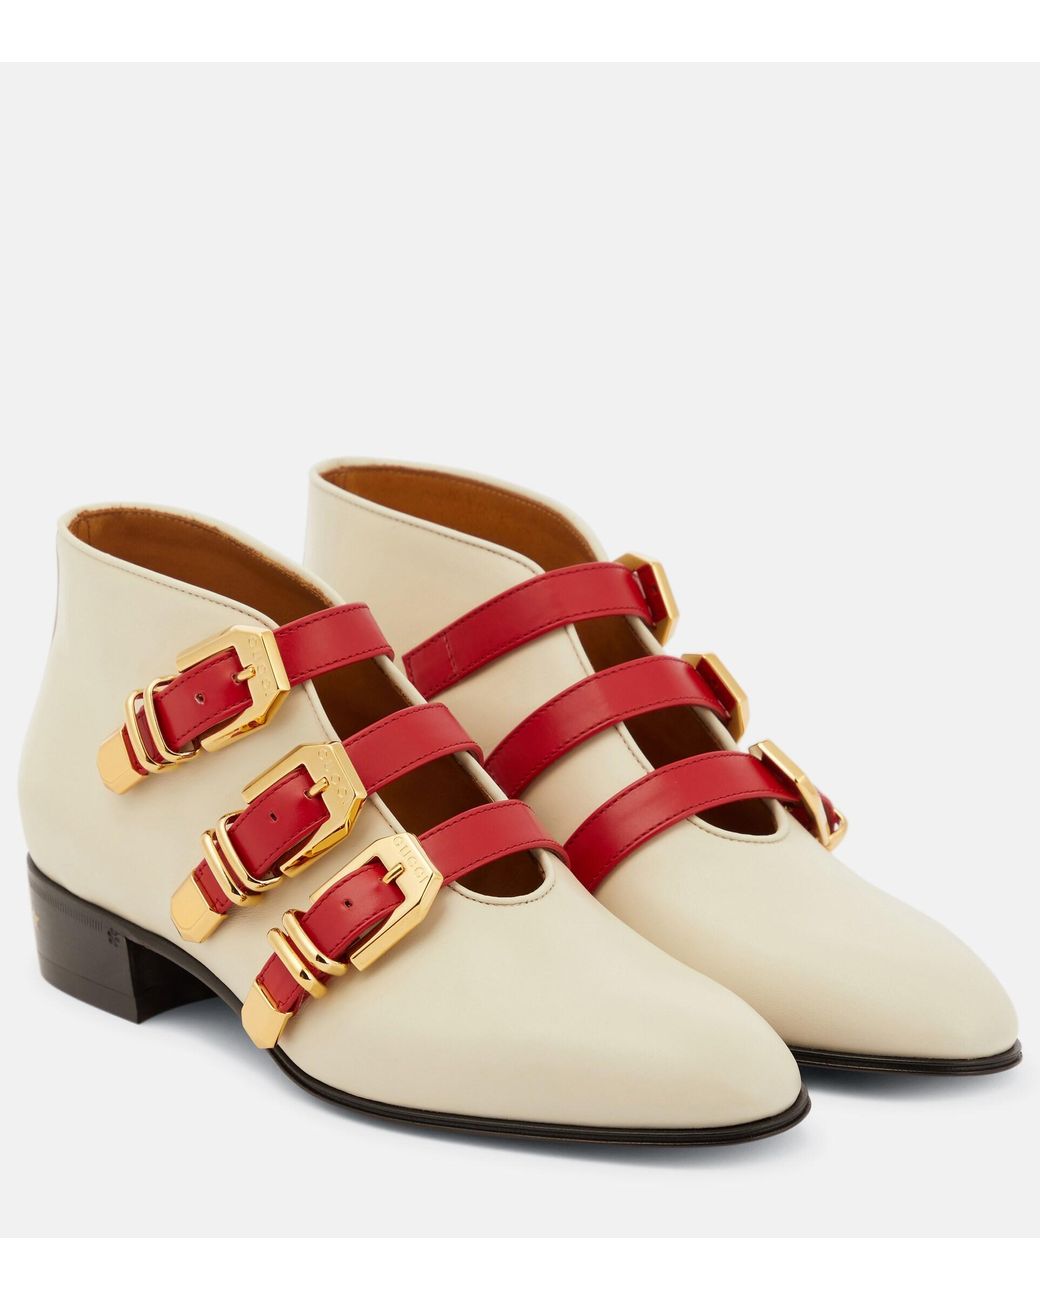 Gucci Buckled Leather Ankle Boots in Pink | Lyst